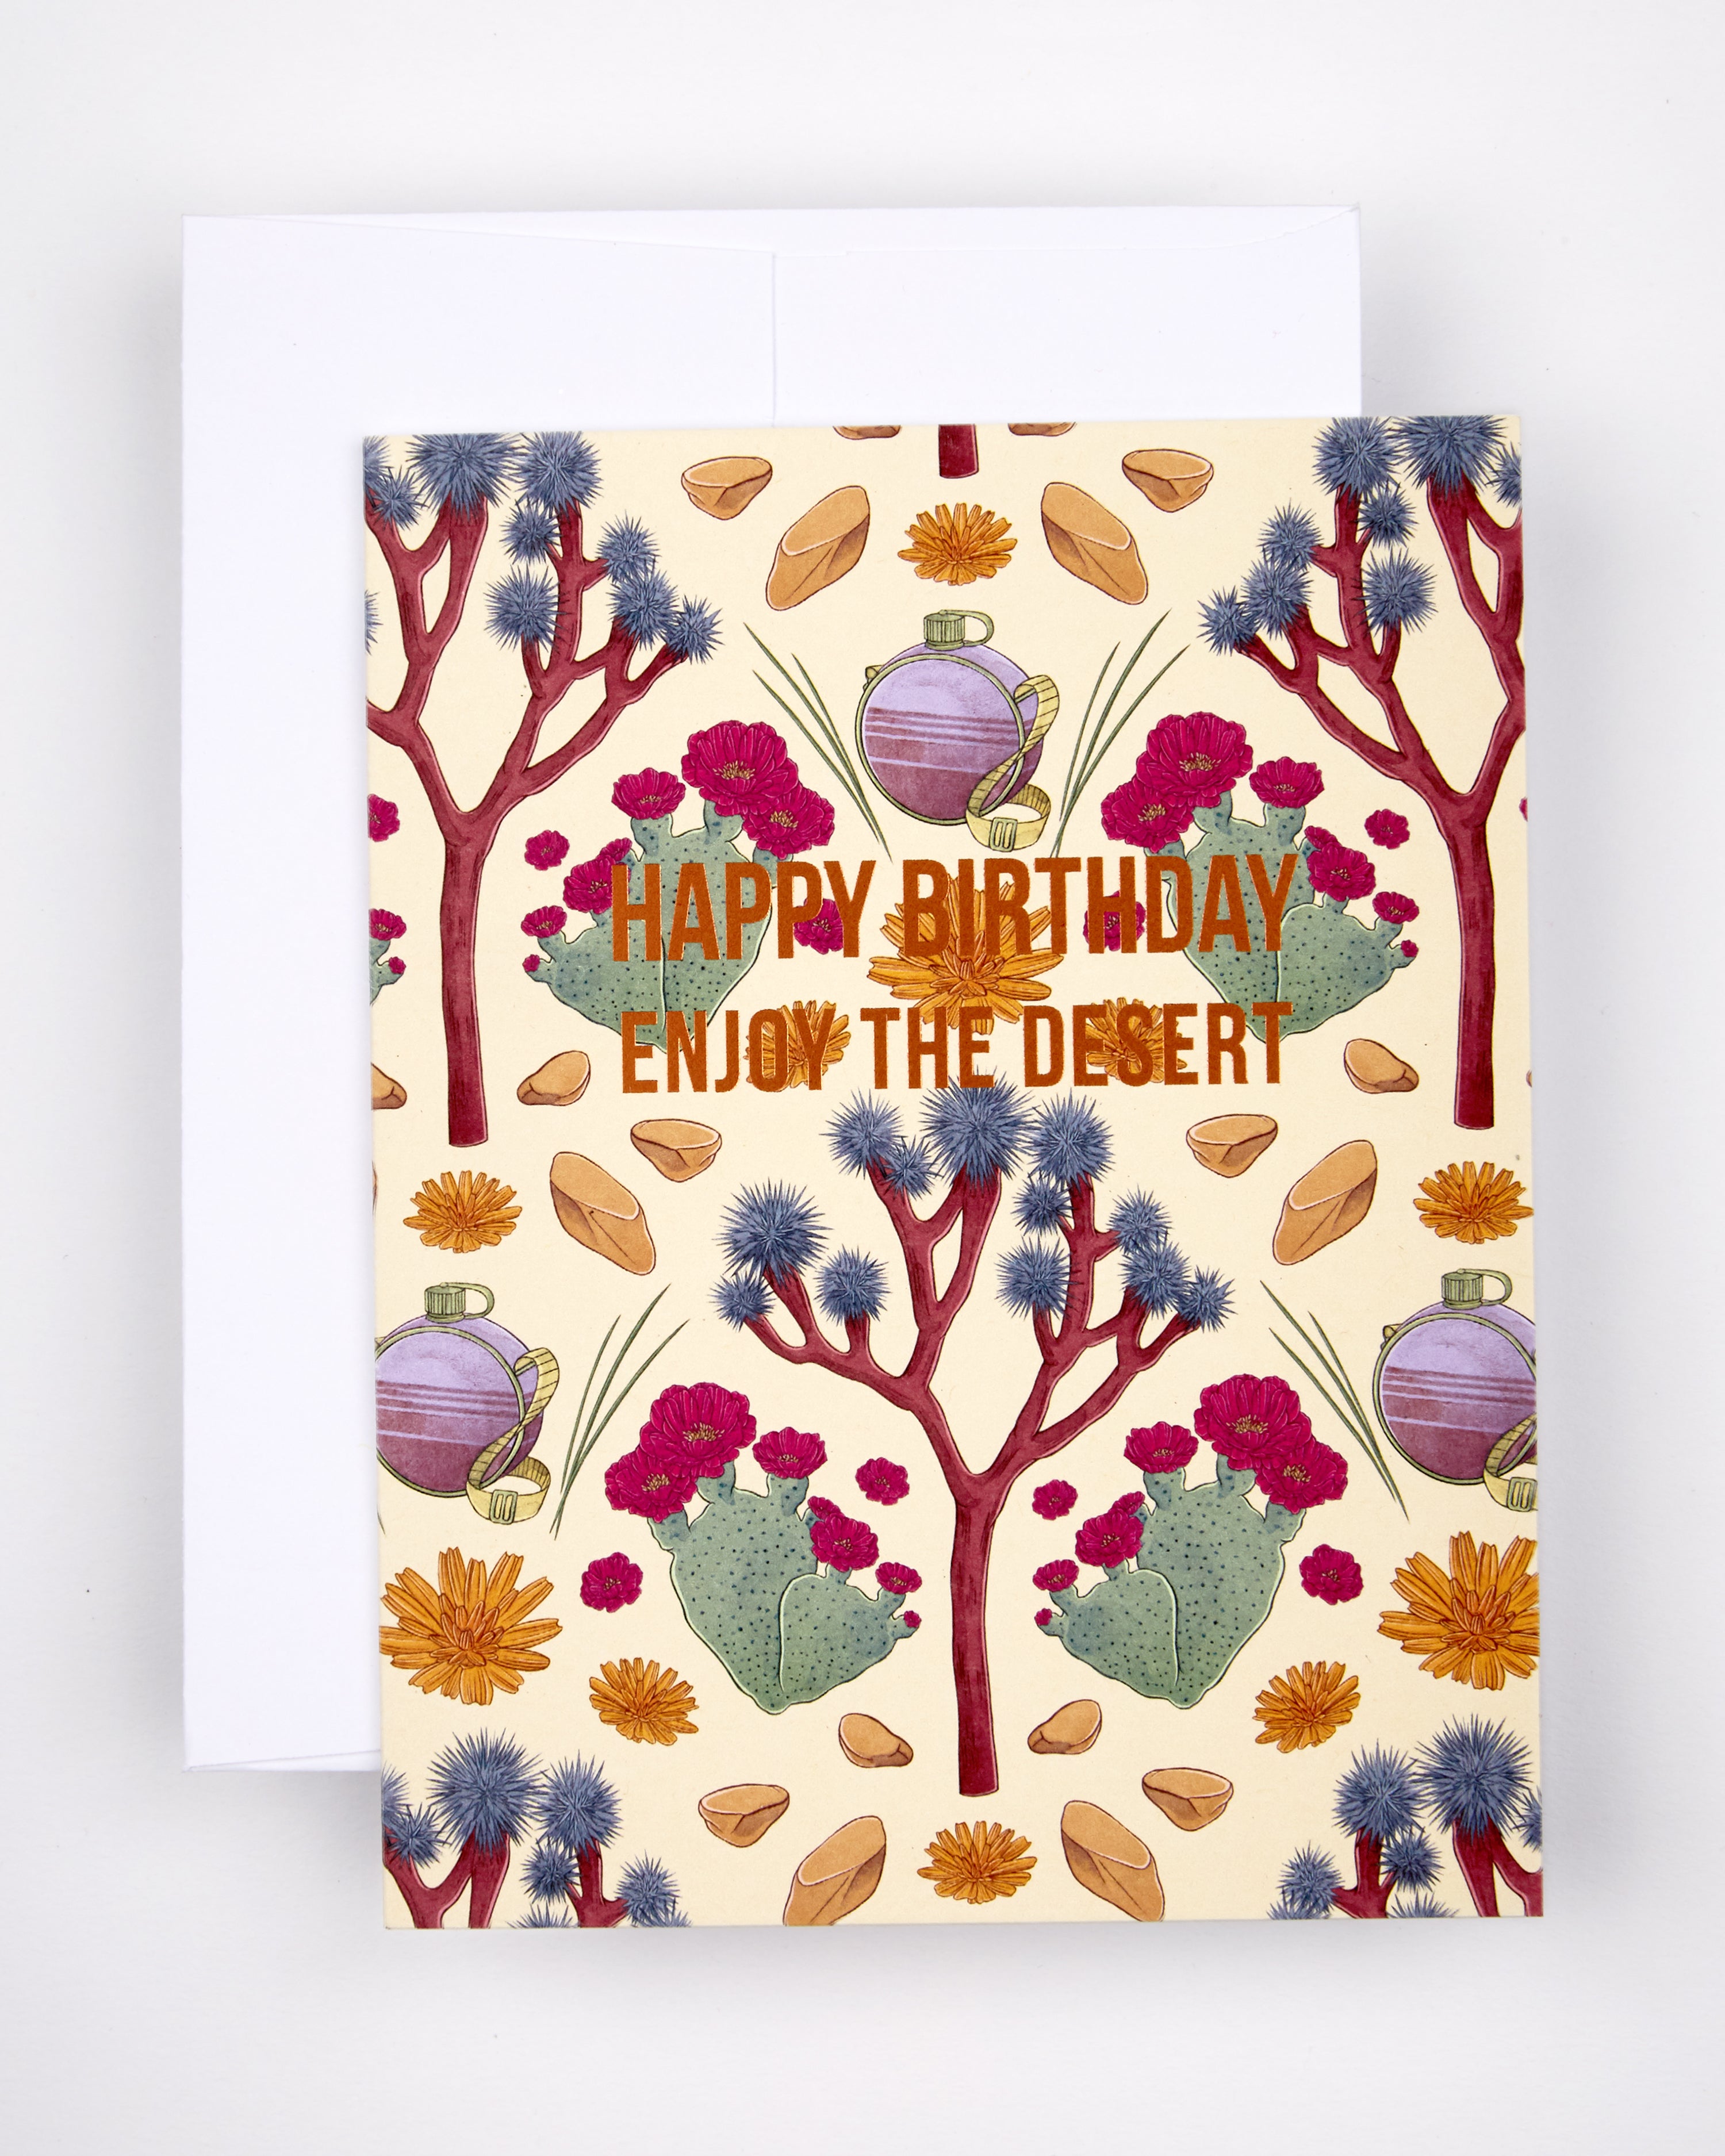 Greeting card with the text Happy Birthday Enjoy the Desert over a desert image